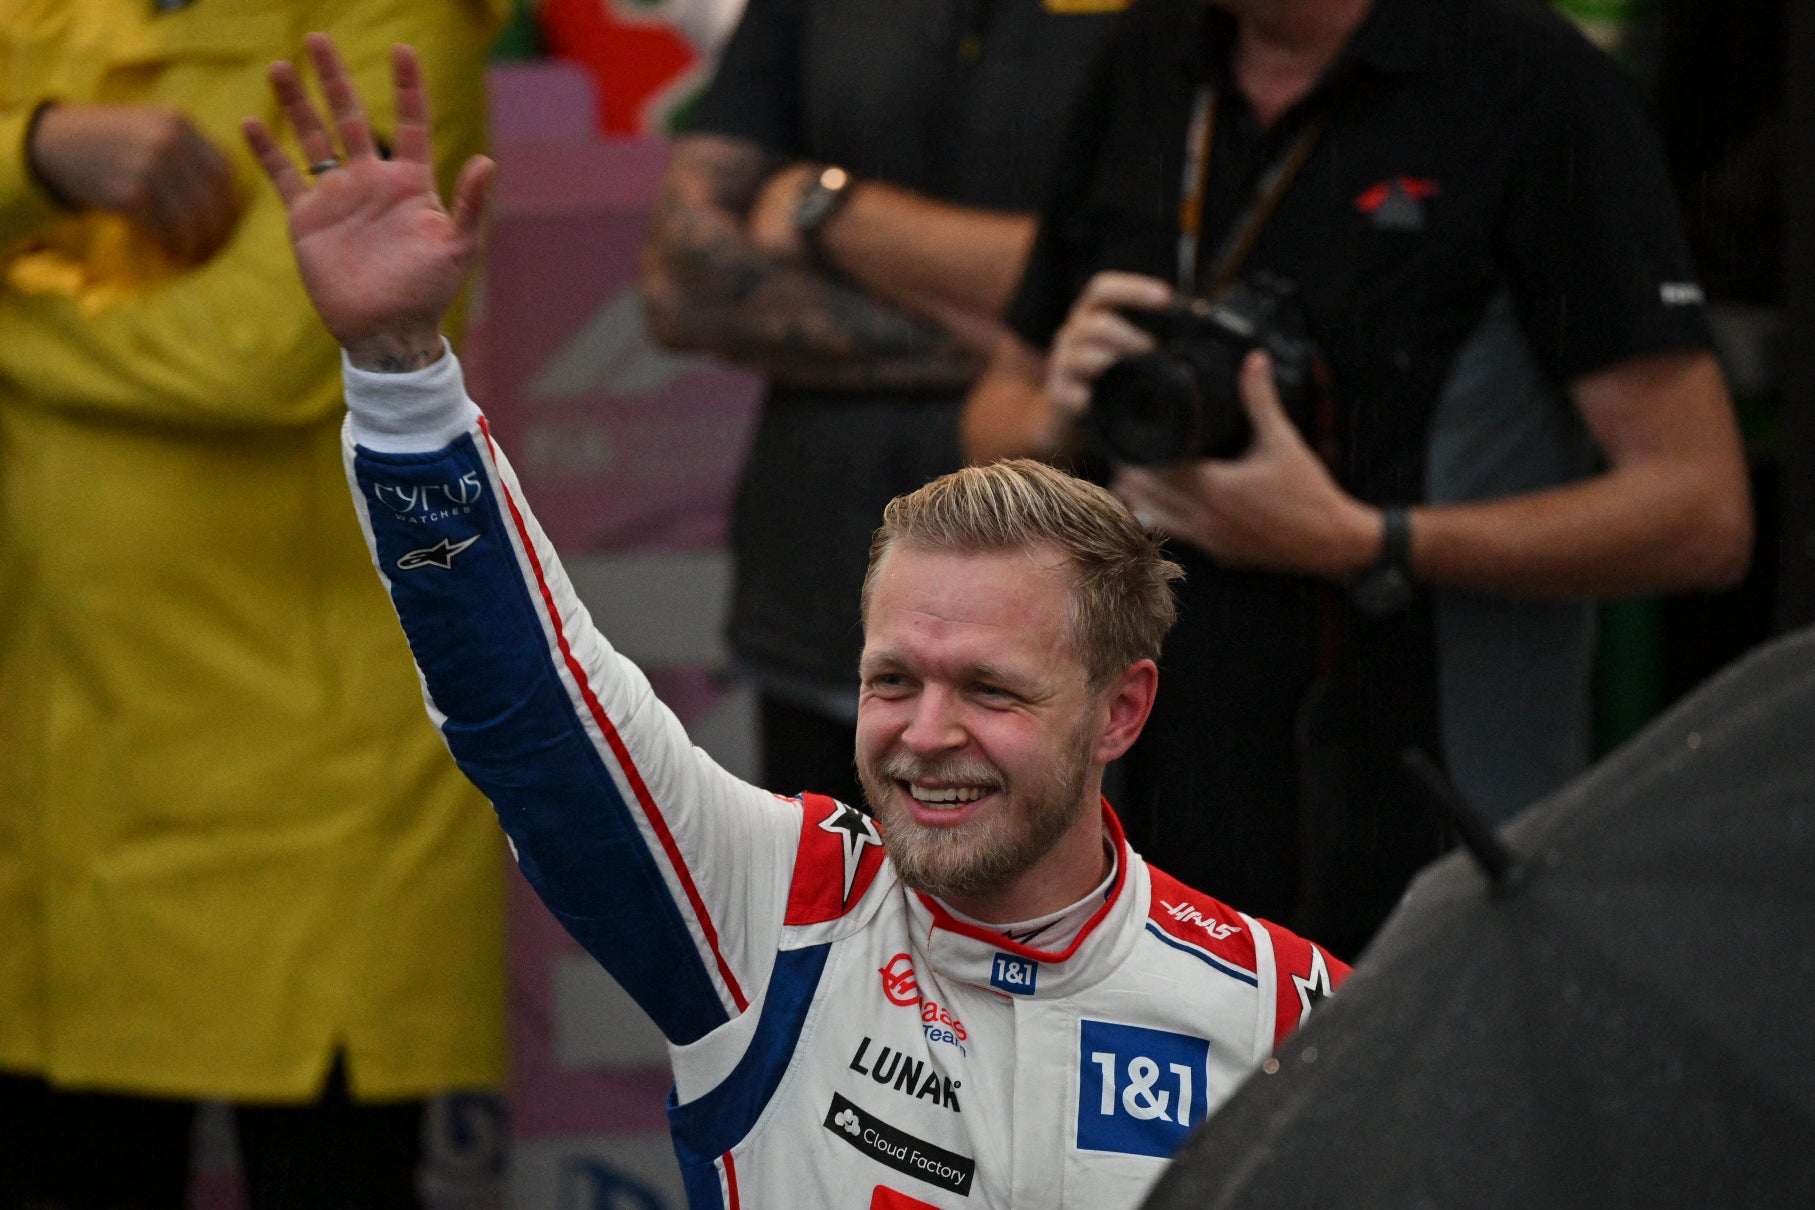 Kevin Magnussen will start on pole position for Saturday’s sprint race at the Brazilian Grand Prix